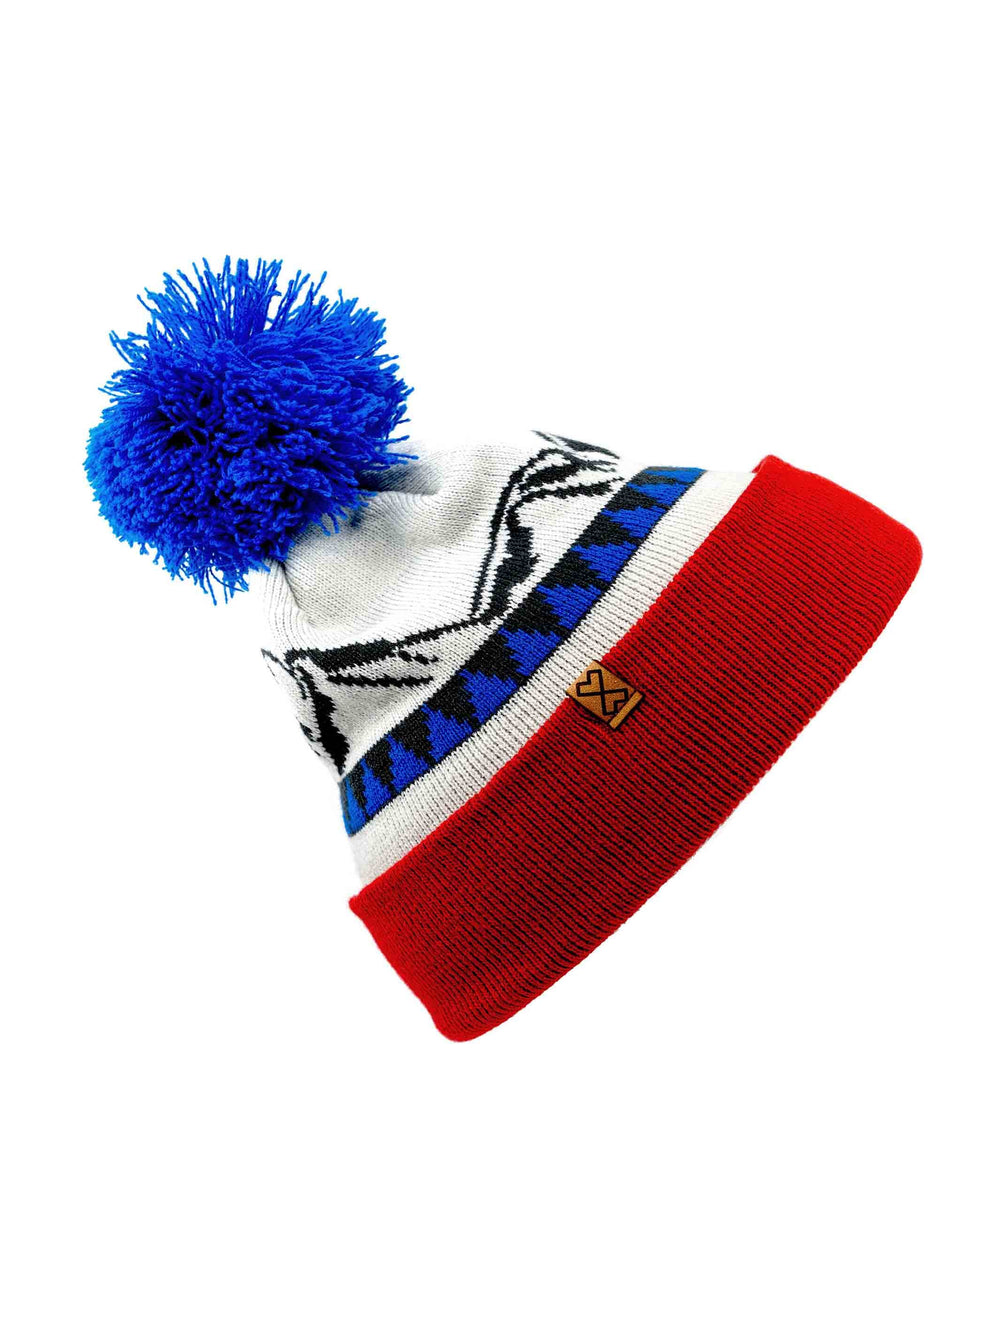 Milk X Whiskey - Youth Round Top Peaks Beanie - Red White and Blue